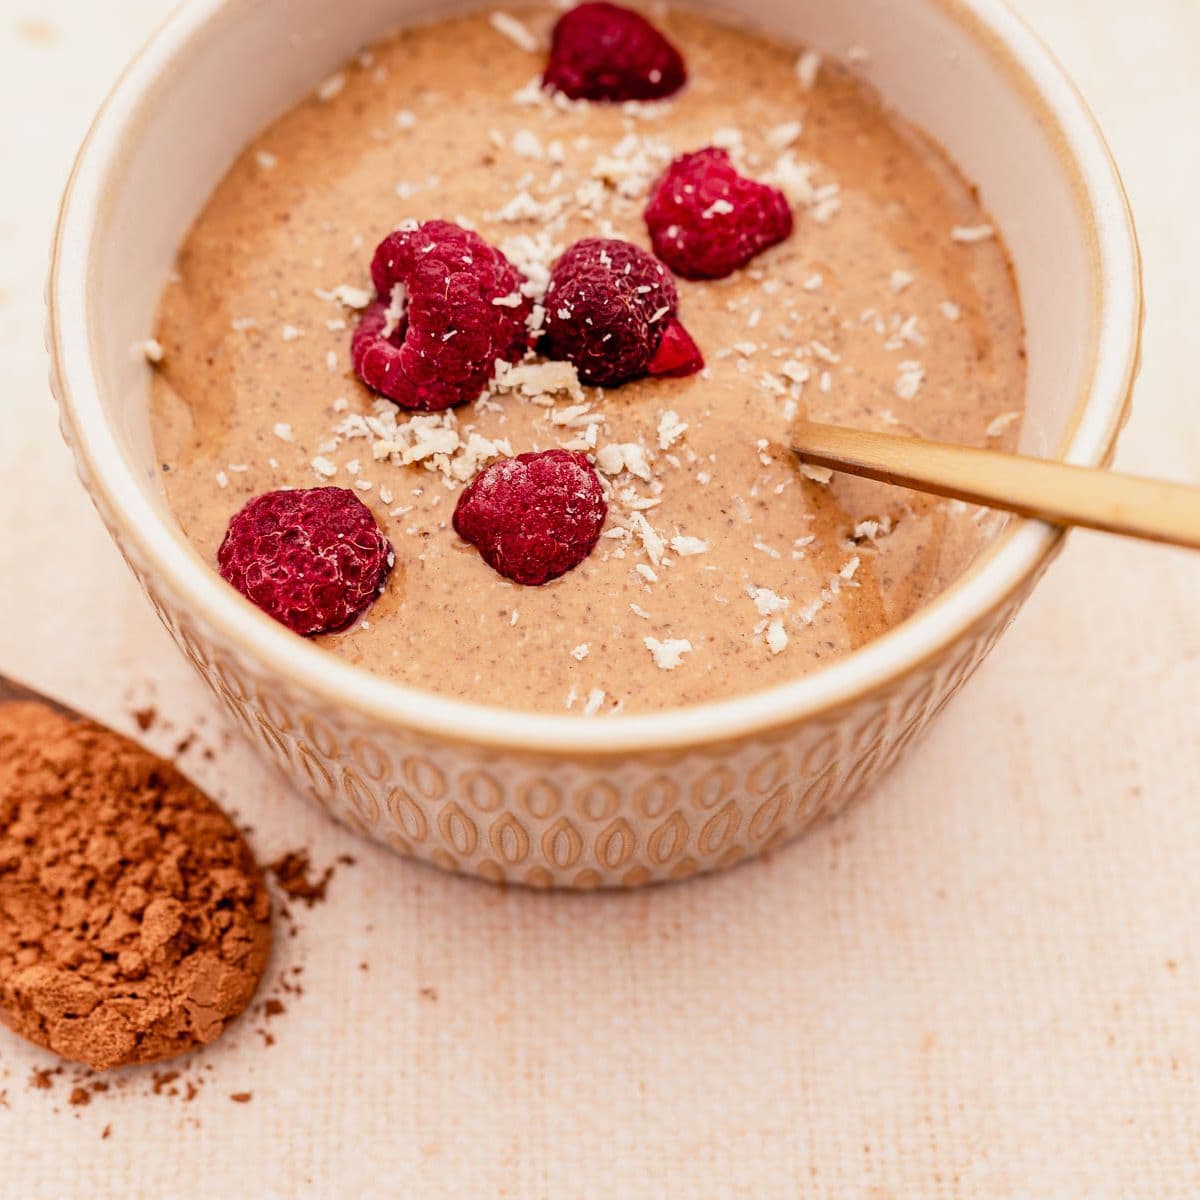 A bowl of blended chocolate chia pudding with raspberries.